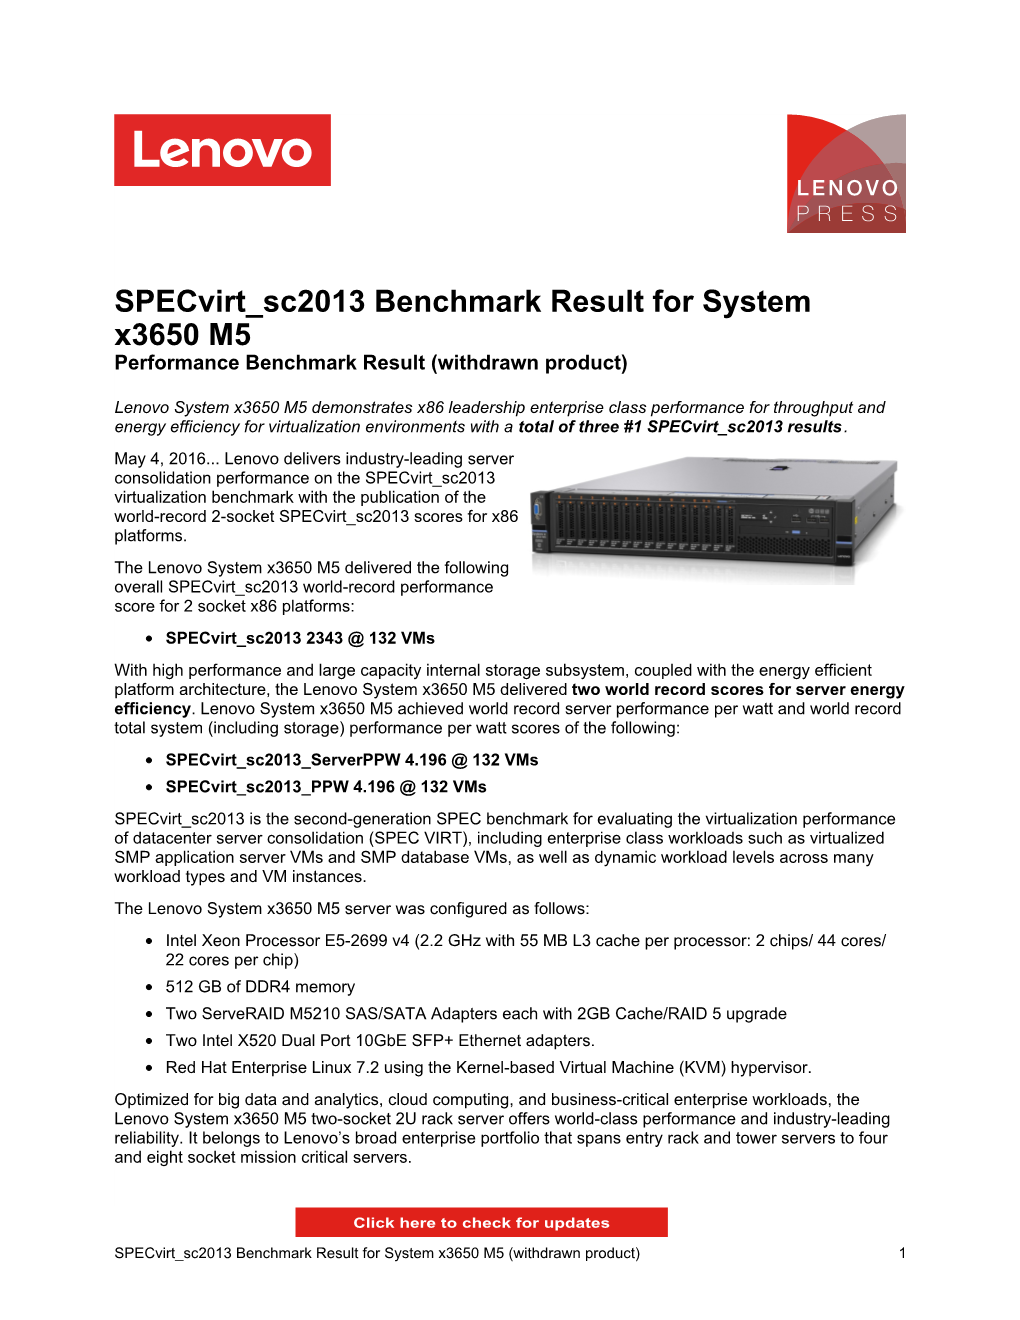 Specvirt Sc2013 Benchmark Result for System X3650 M5 Performance Benchmark Result (Withdrawn Product)